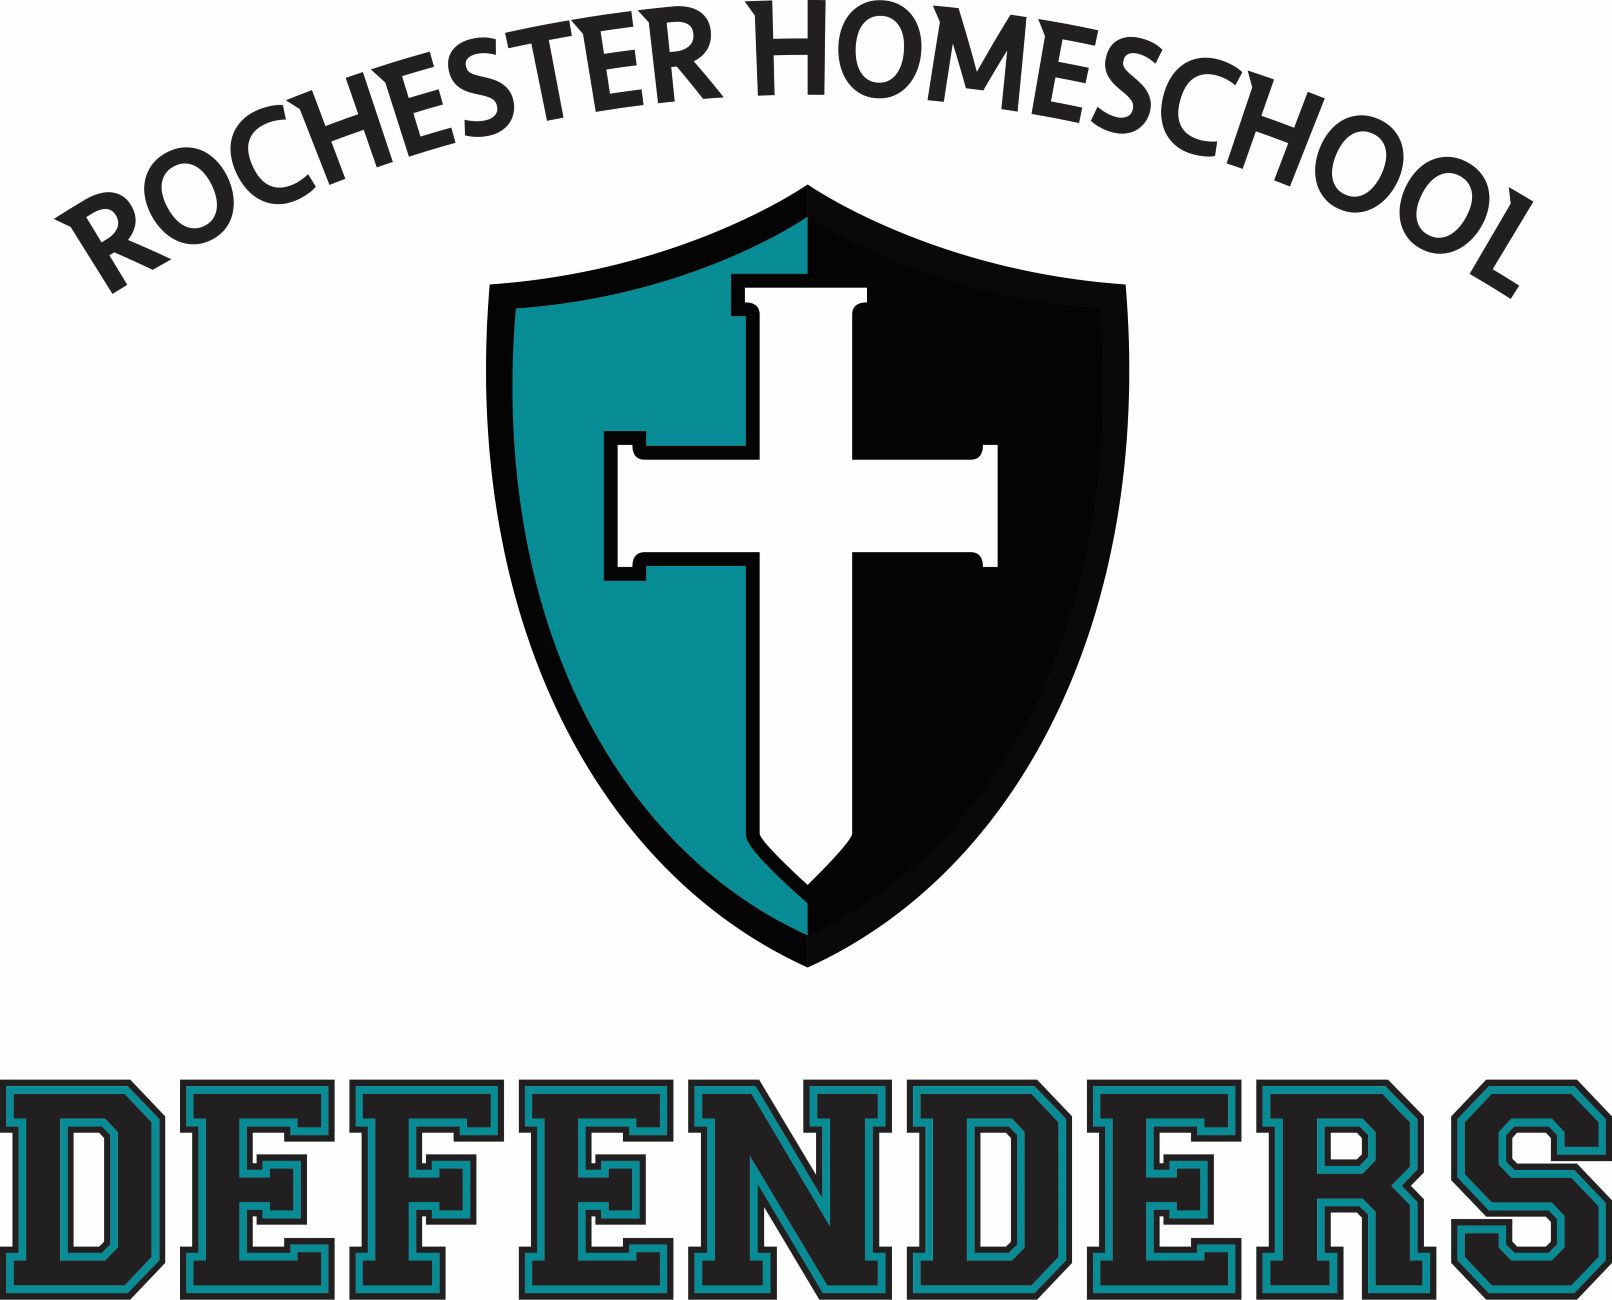 You are currently viewing Rochester Area Homeschool, Defenders